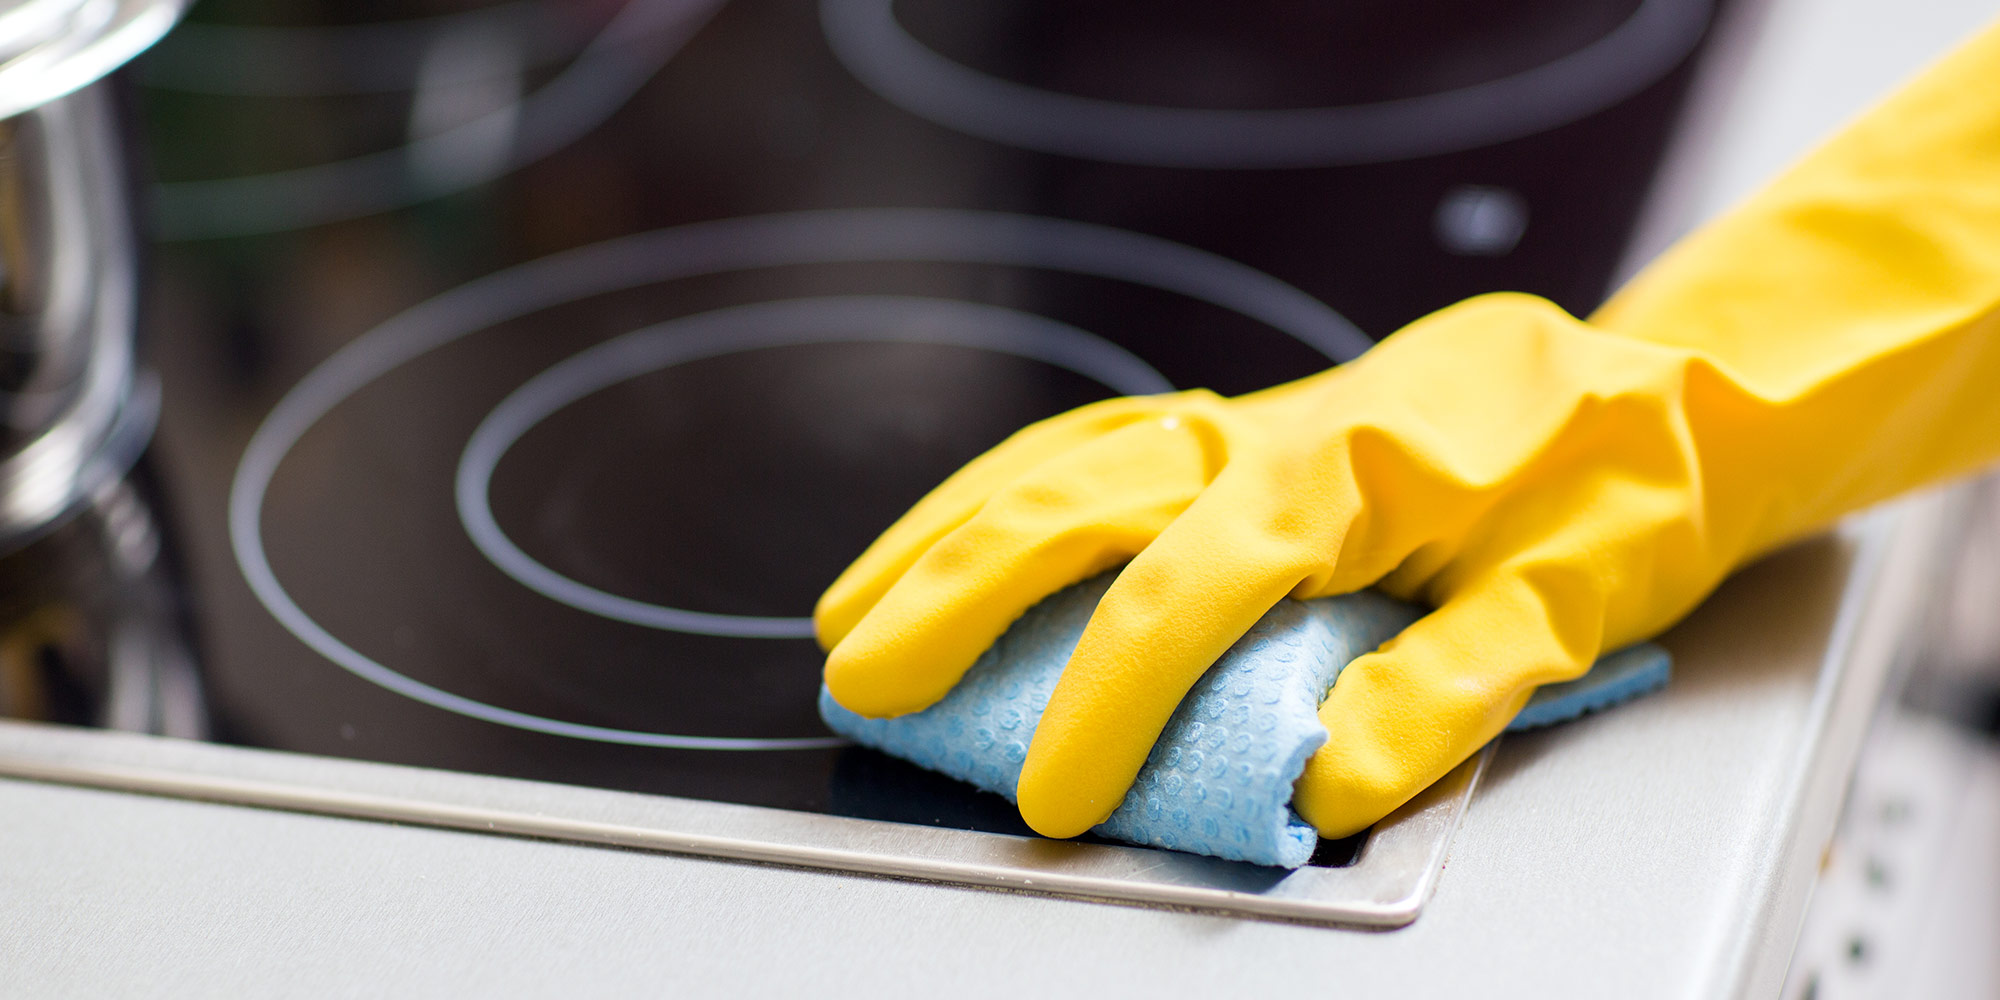 To help make cleaning easier, manufacturers have introduced wonderful new cleaning products and equipment. I love microfiber cloths because they are so handy and do a great cleaning job. Try these hints for using them around the house.